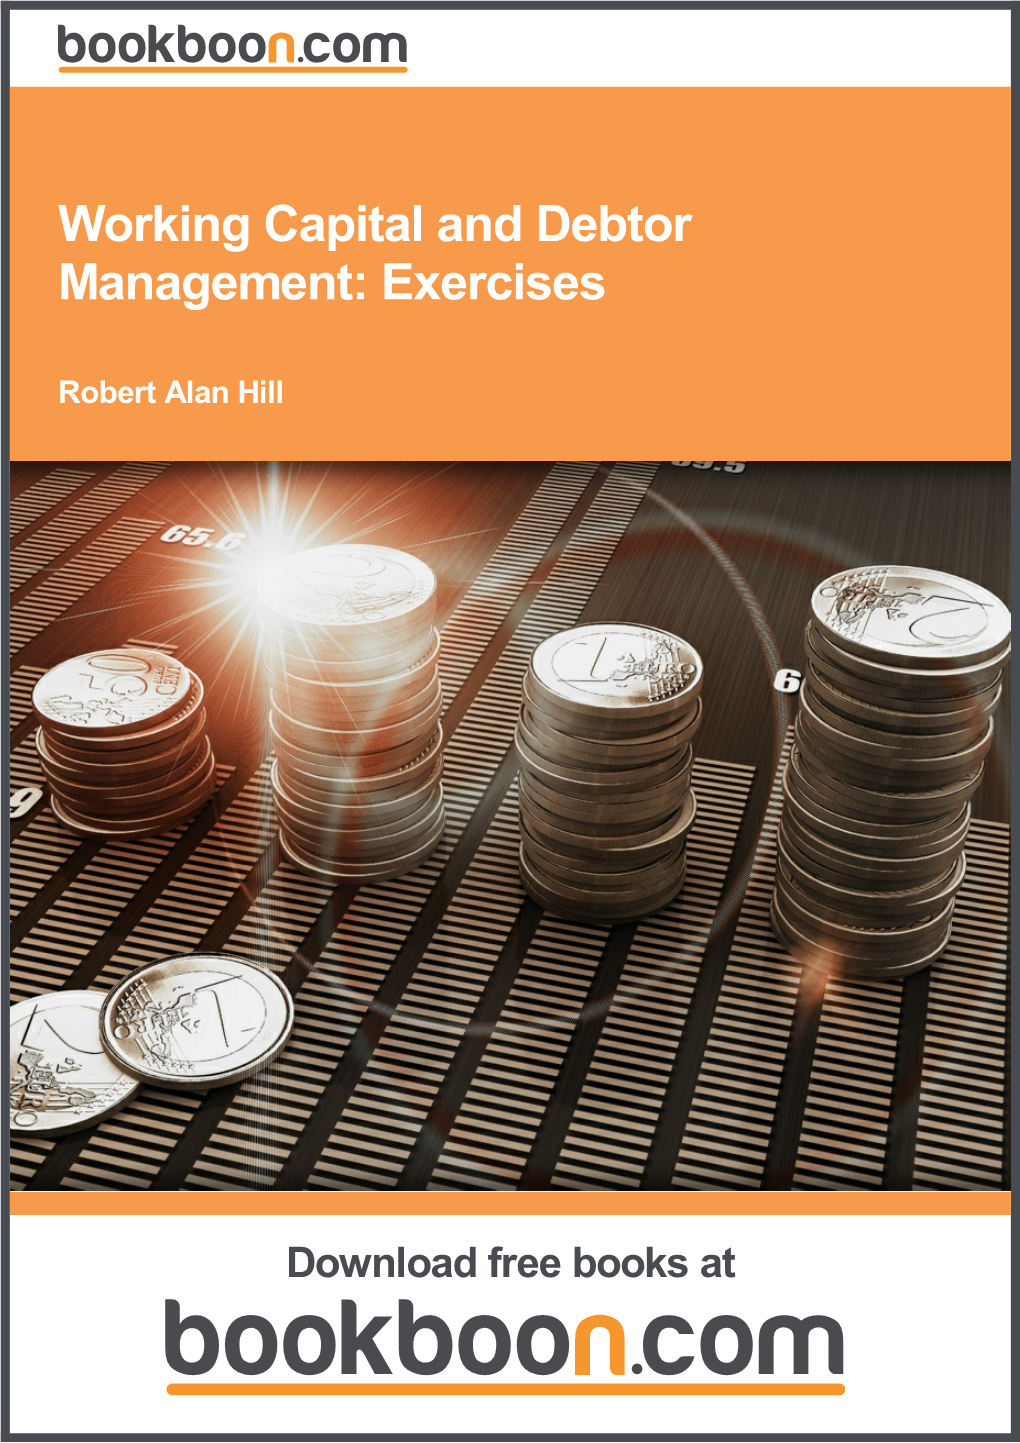 Working Capital and Debtor Management: Exercises